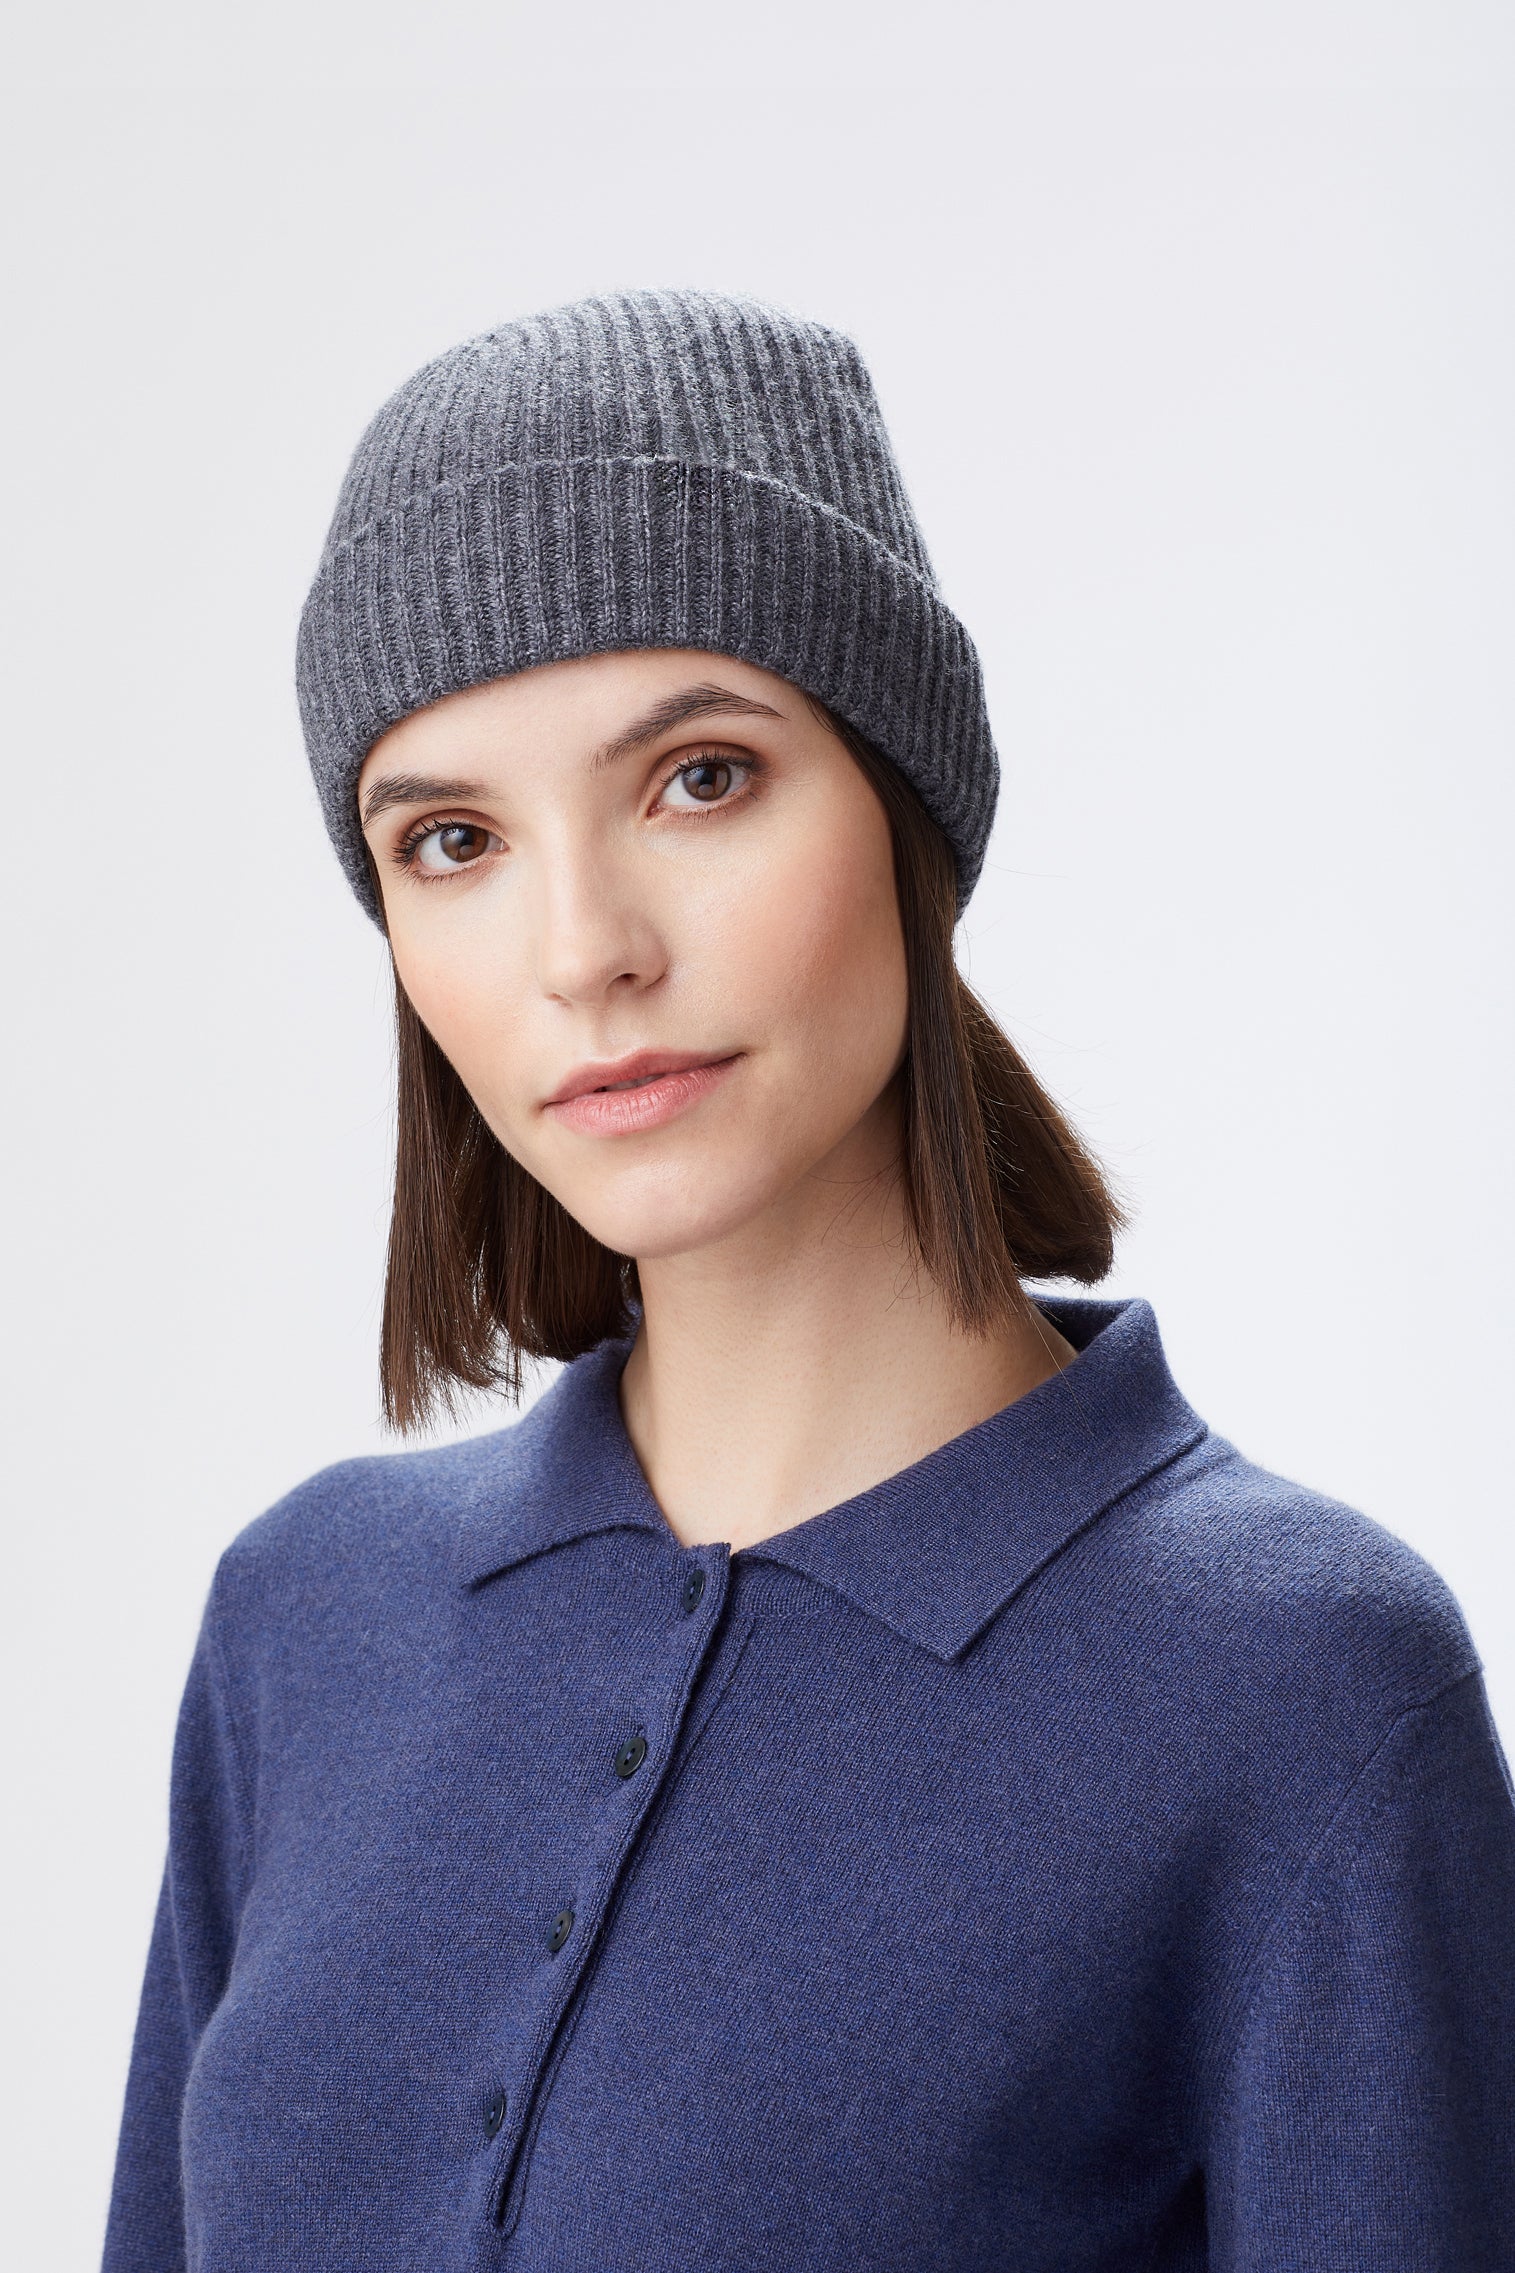 Grey Cashmere Ski Beanie - Products - Lock & Co. Hatters London UK